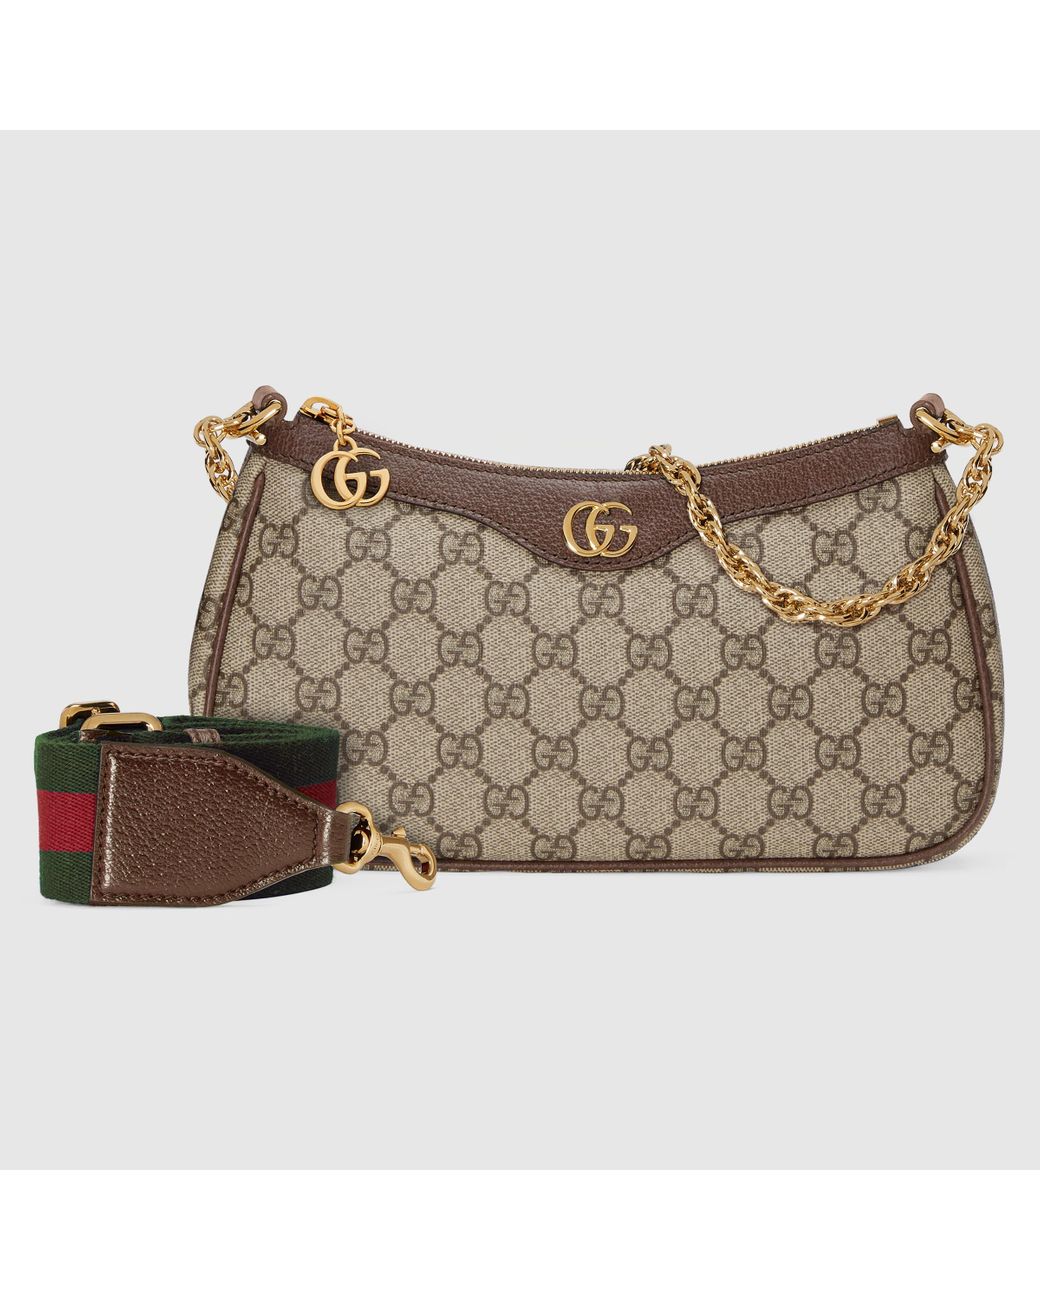 Gucci Ophidia small top handle bag Beige and ebony GG Supreme canvas